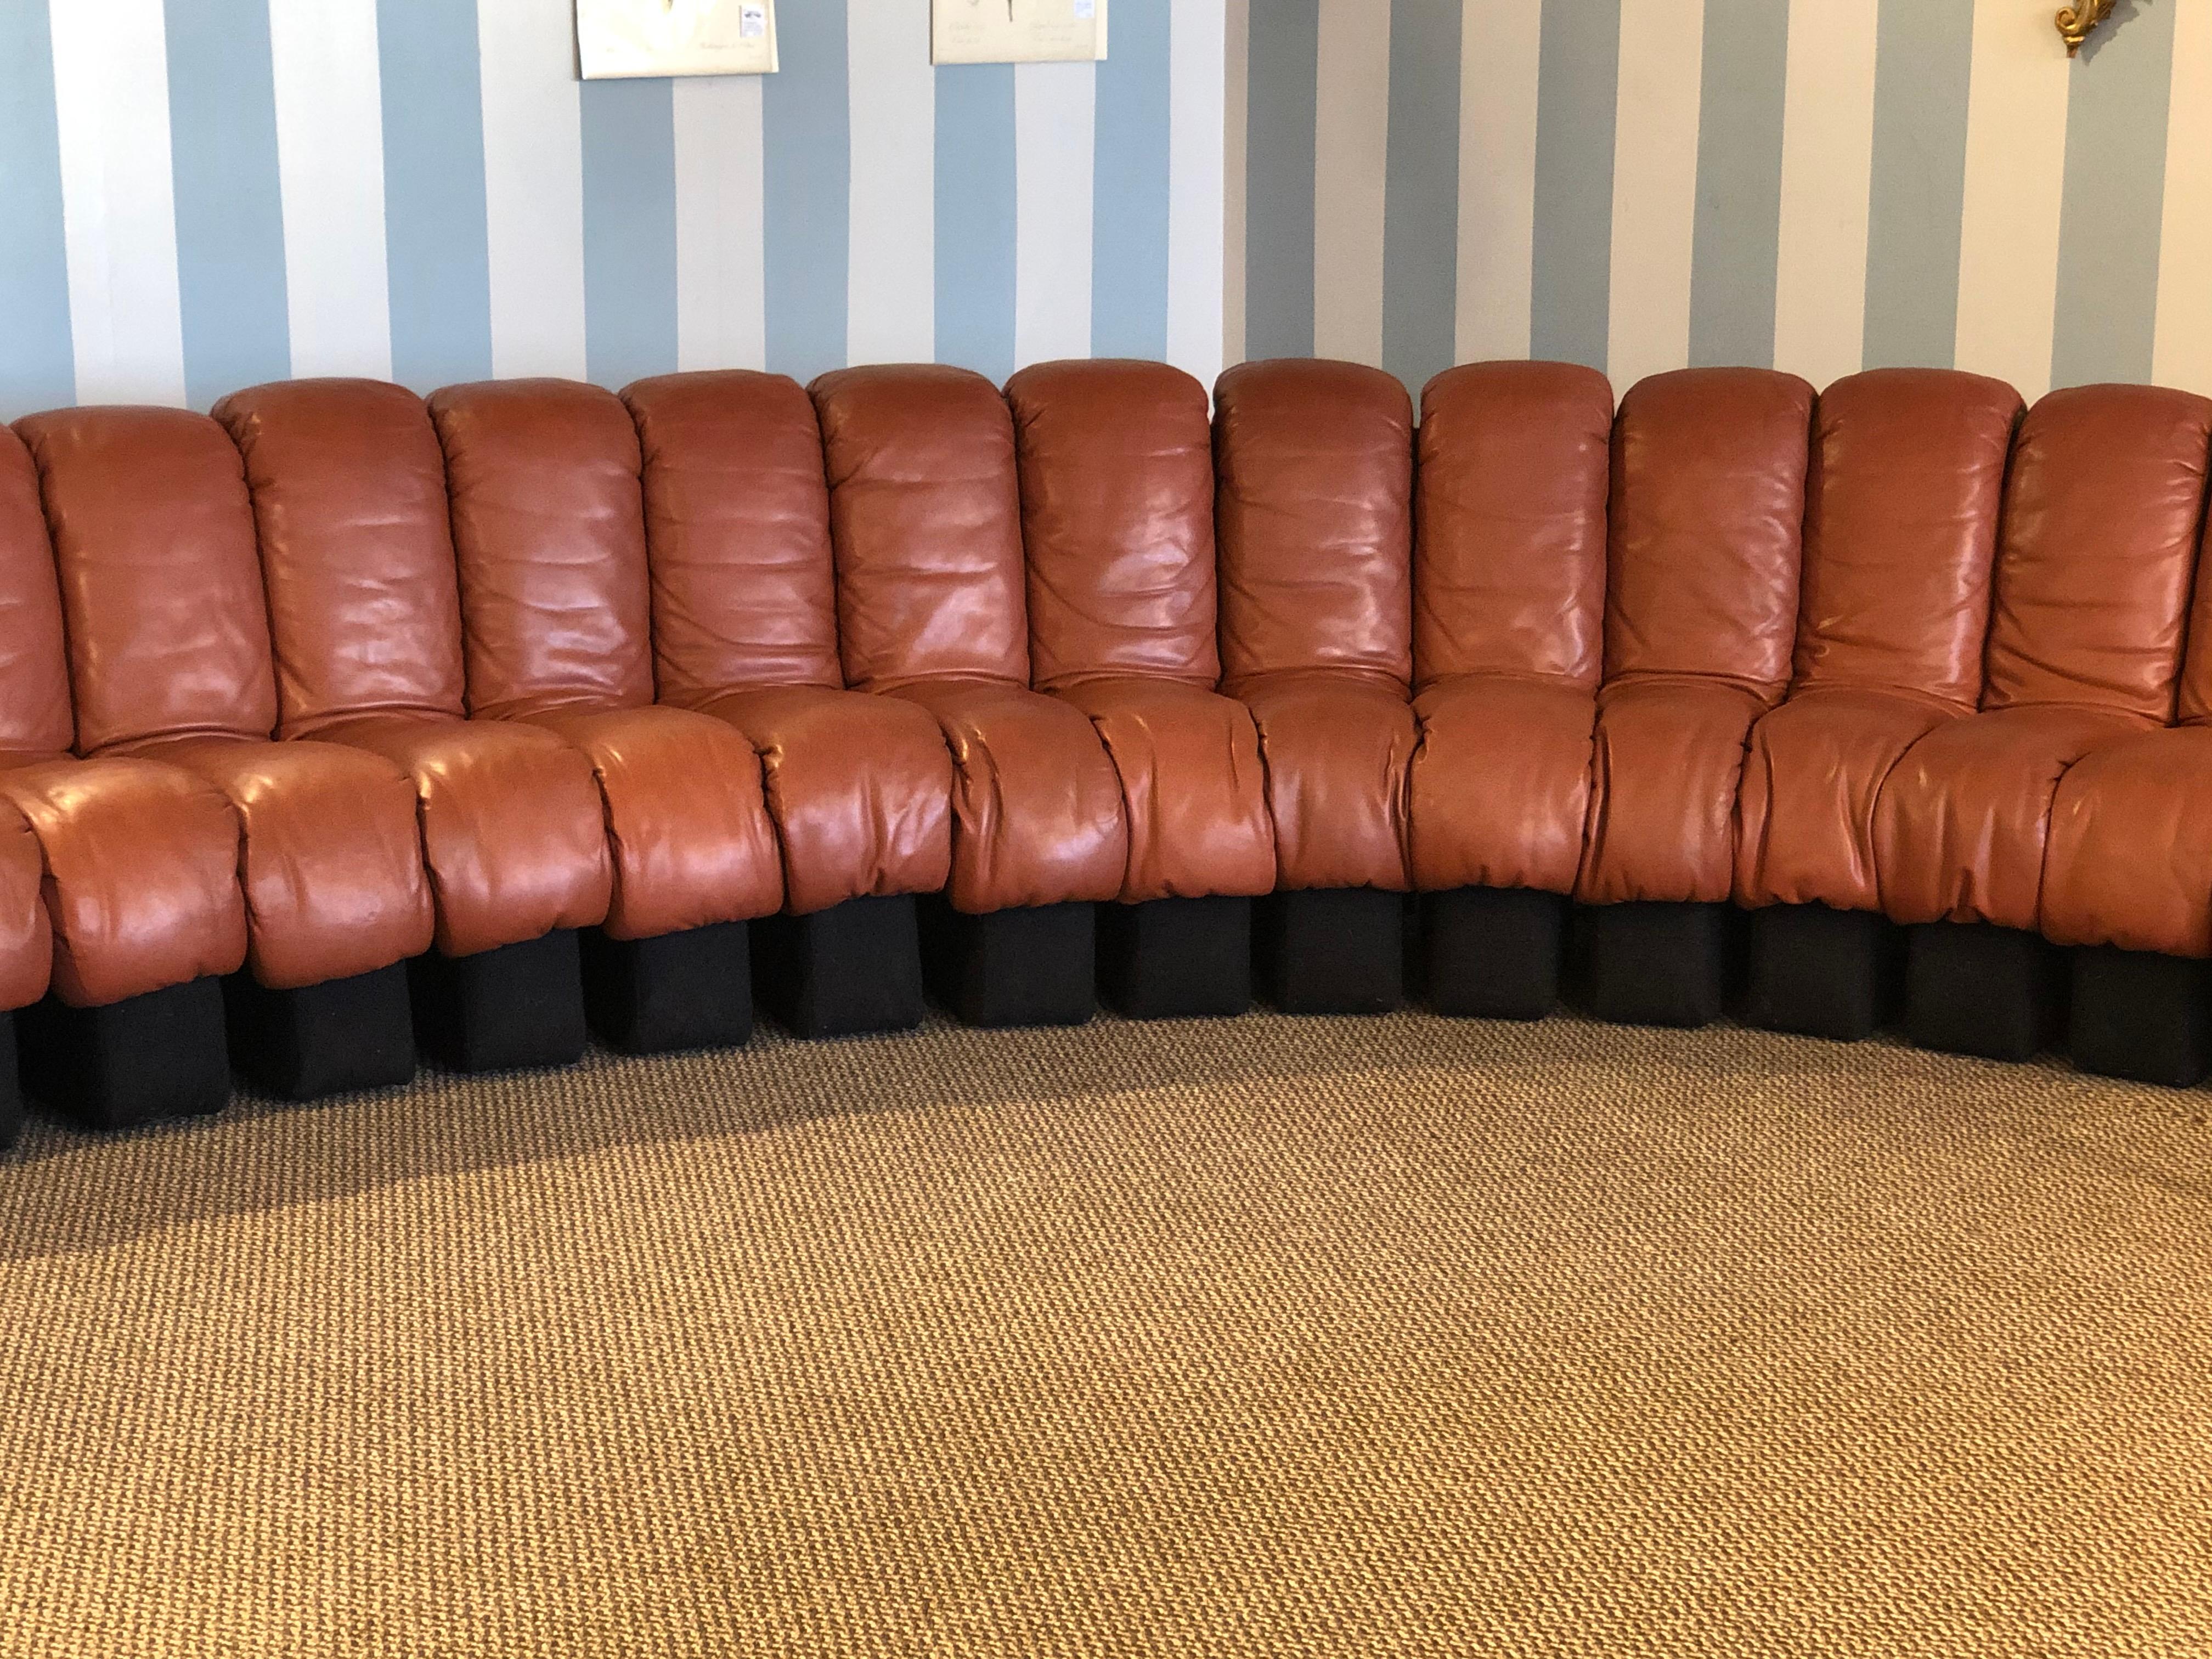 Leather DS-600 Ueli Berger De Sede-Stendig Section Sofa 22 Sections